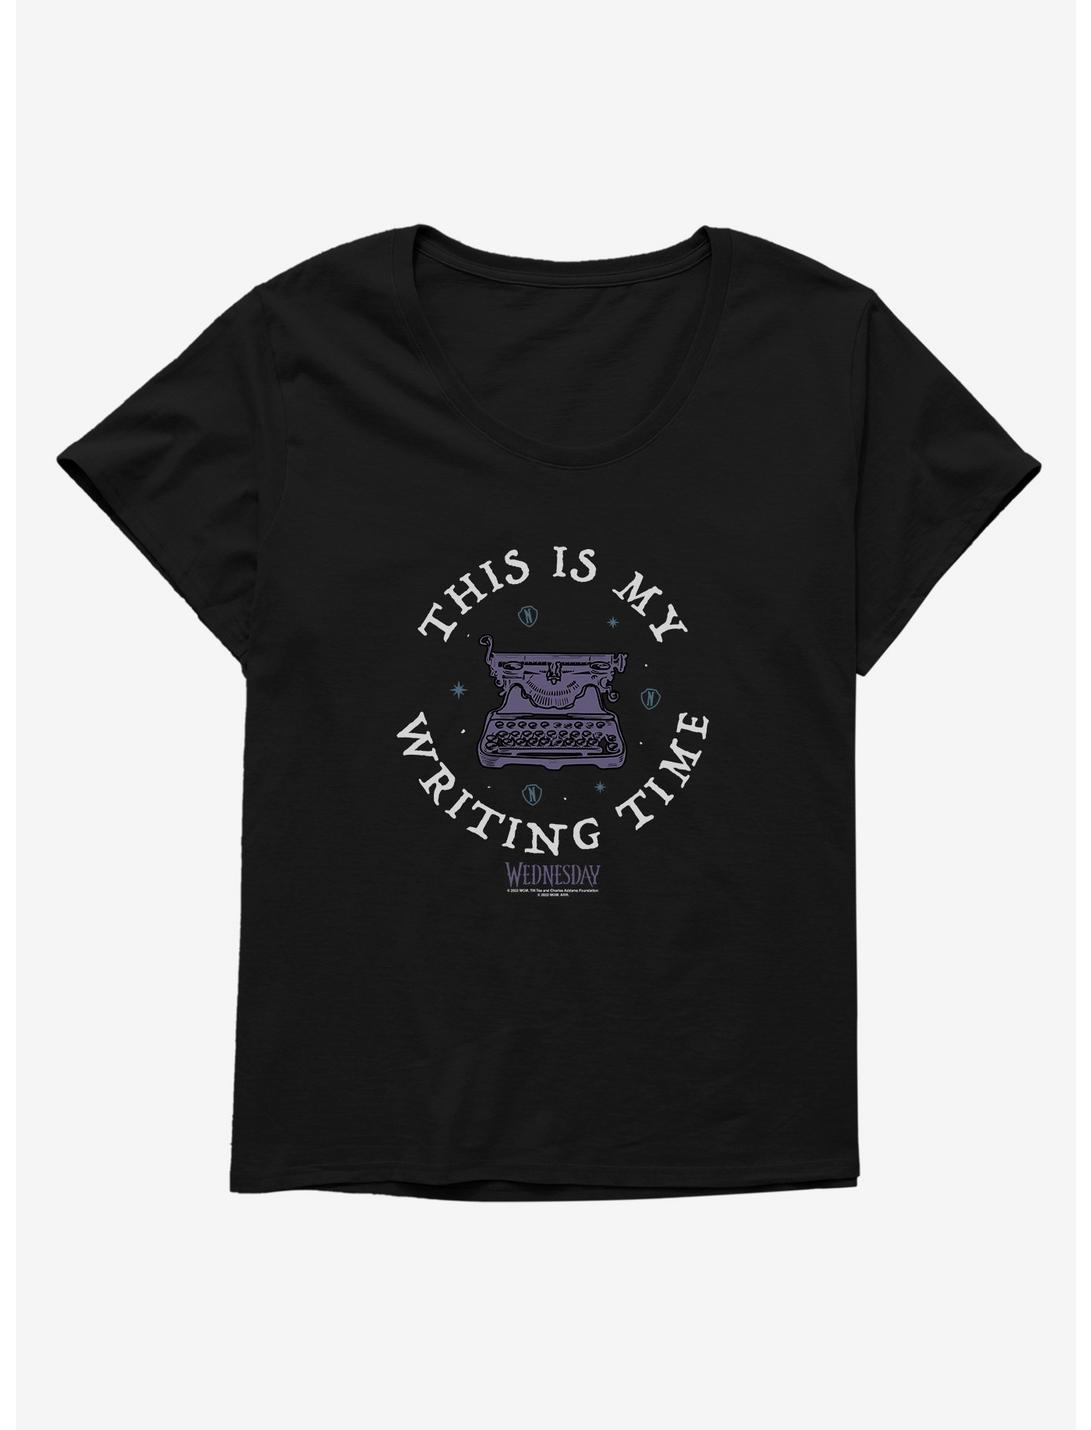 Wednesday This Is My Writing Time Girls T-Shirt Plus Size, BLACK, hi-res